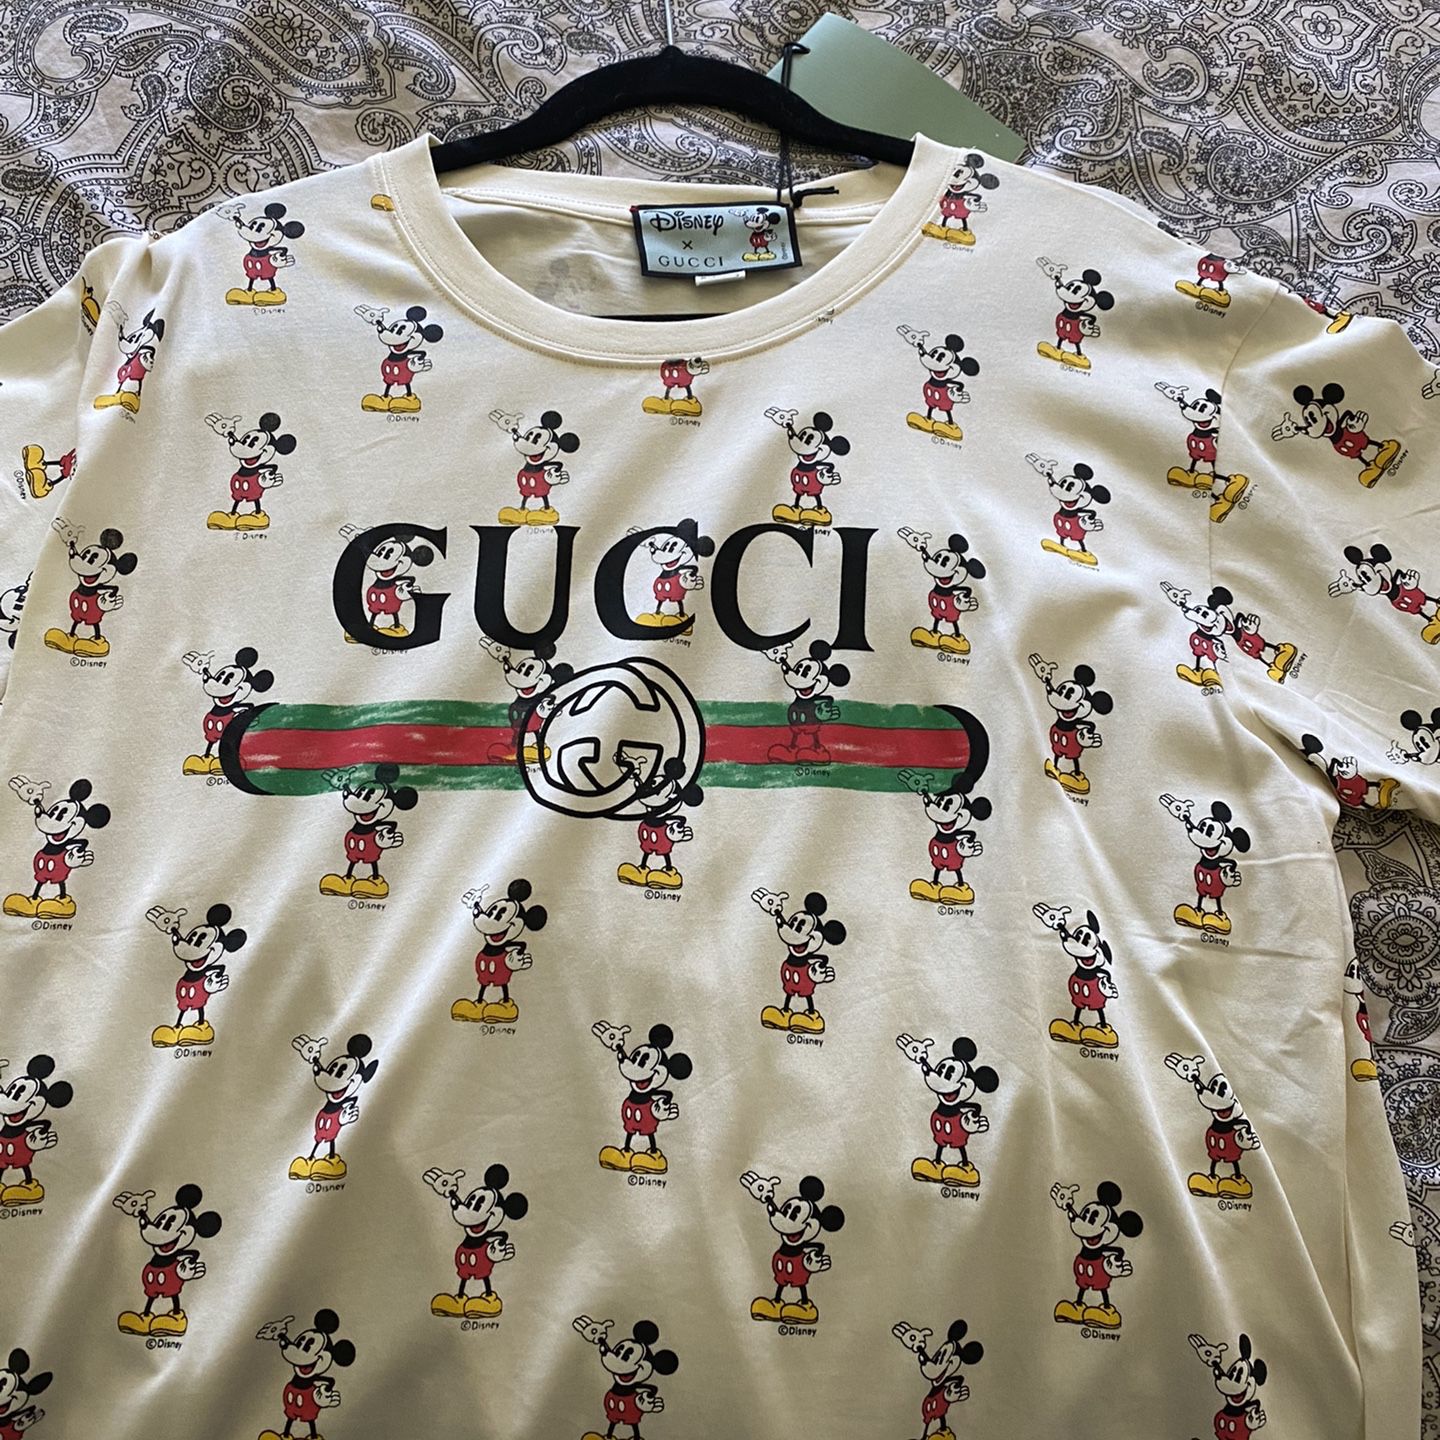 Disney x GUCCI Donald Duck Tee for Sale in Mesa, AZ - OfferUp